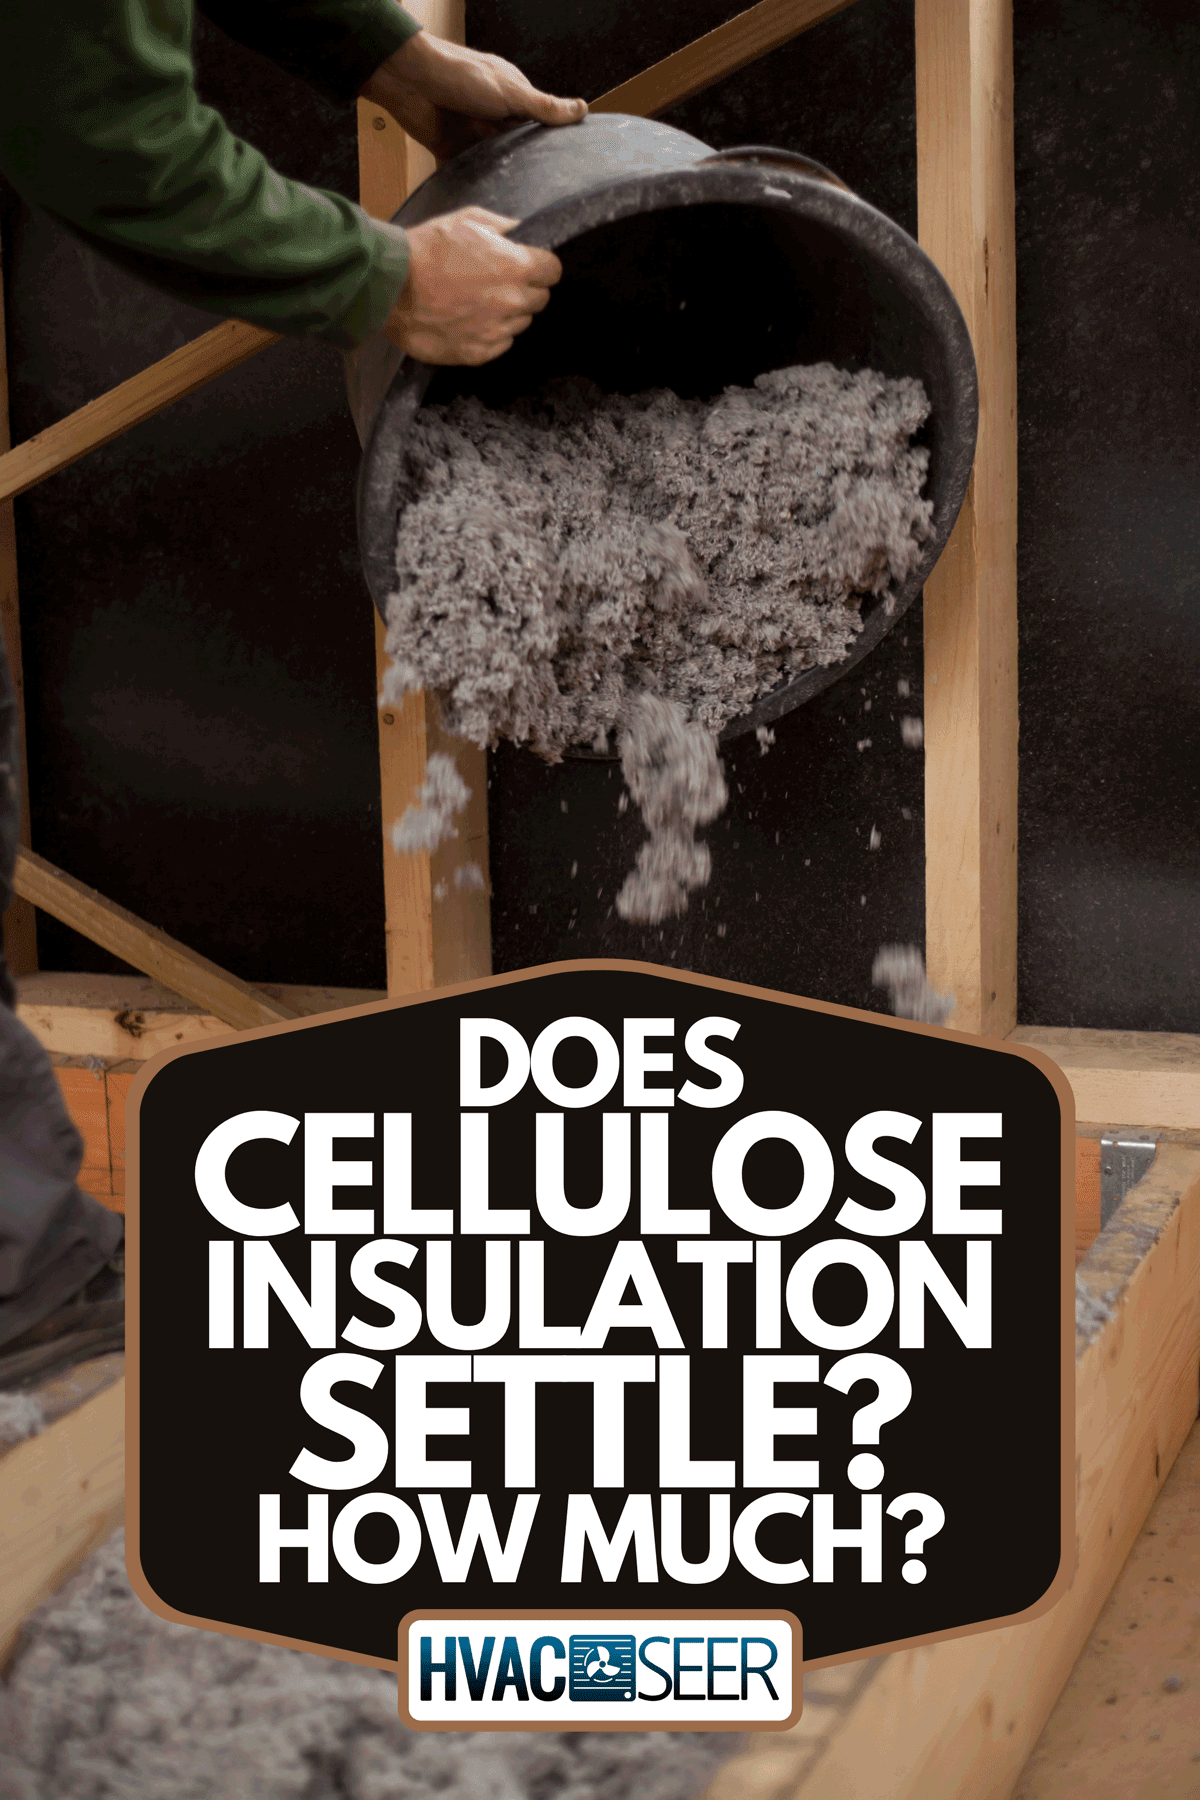 A recycled paper floor construction insulation, Does Cellulose Insulation Settle? How Much?